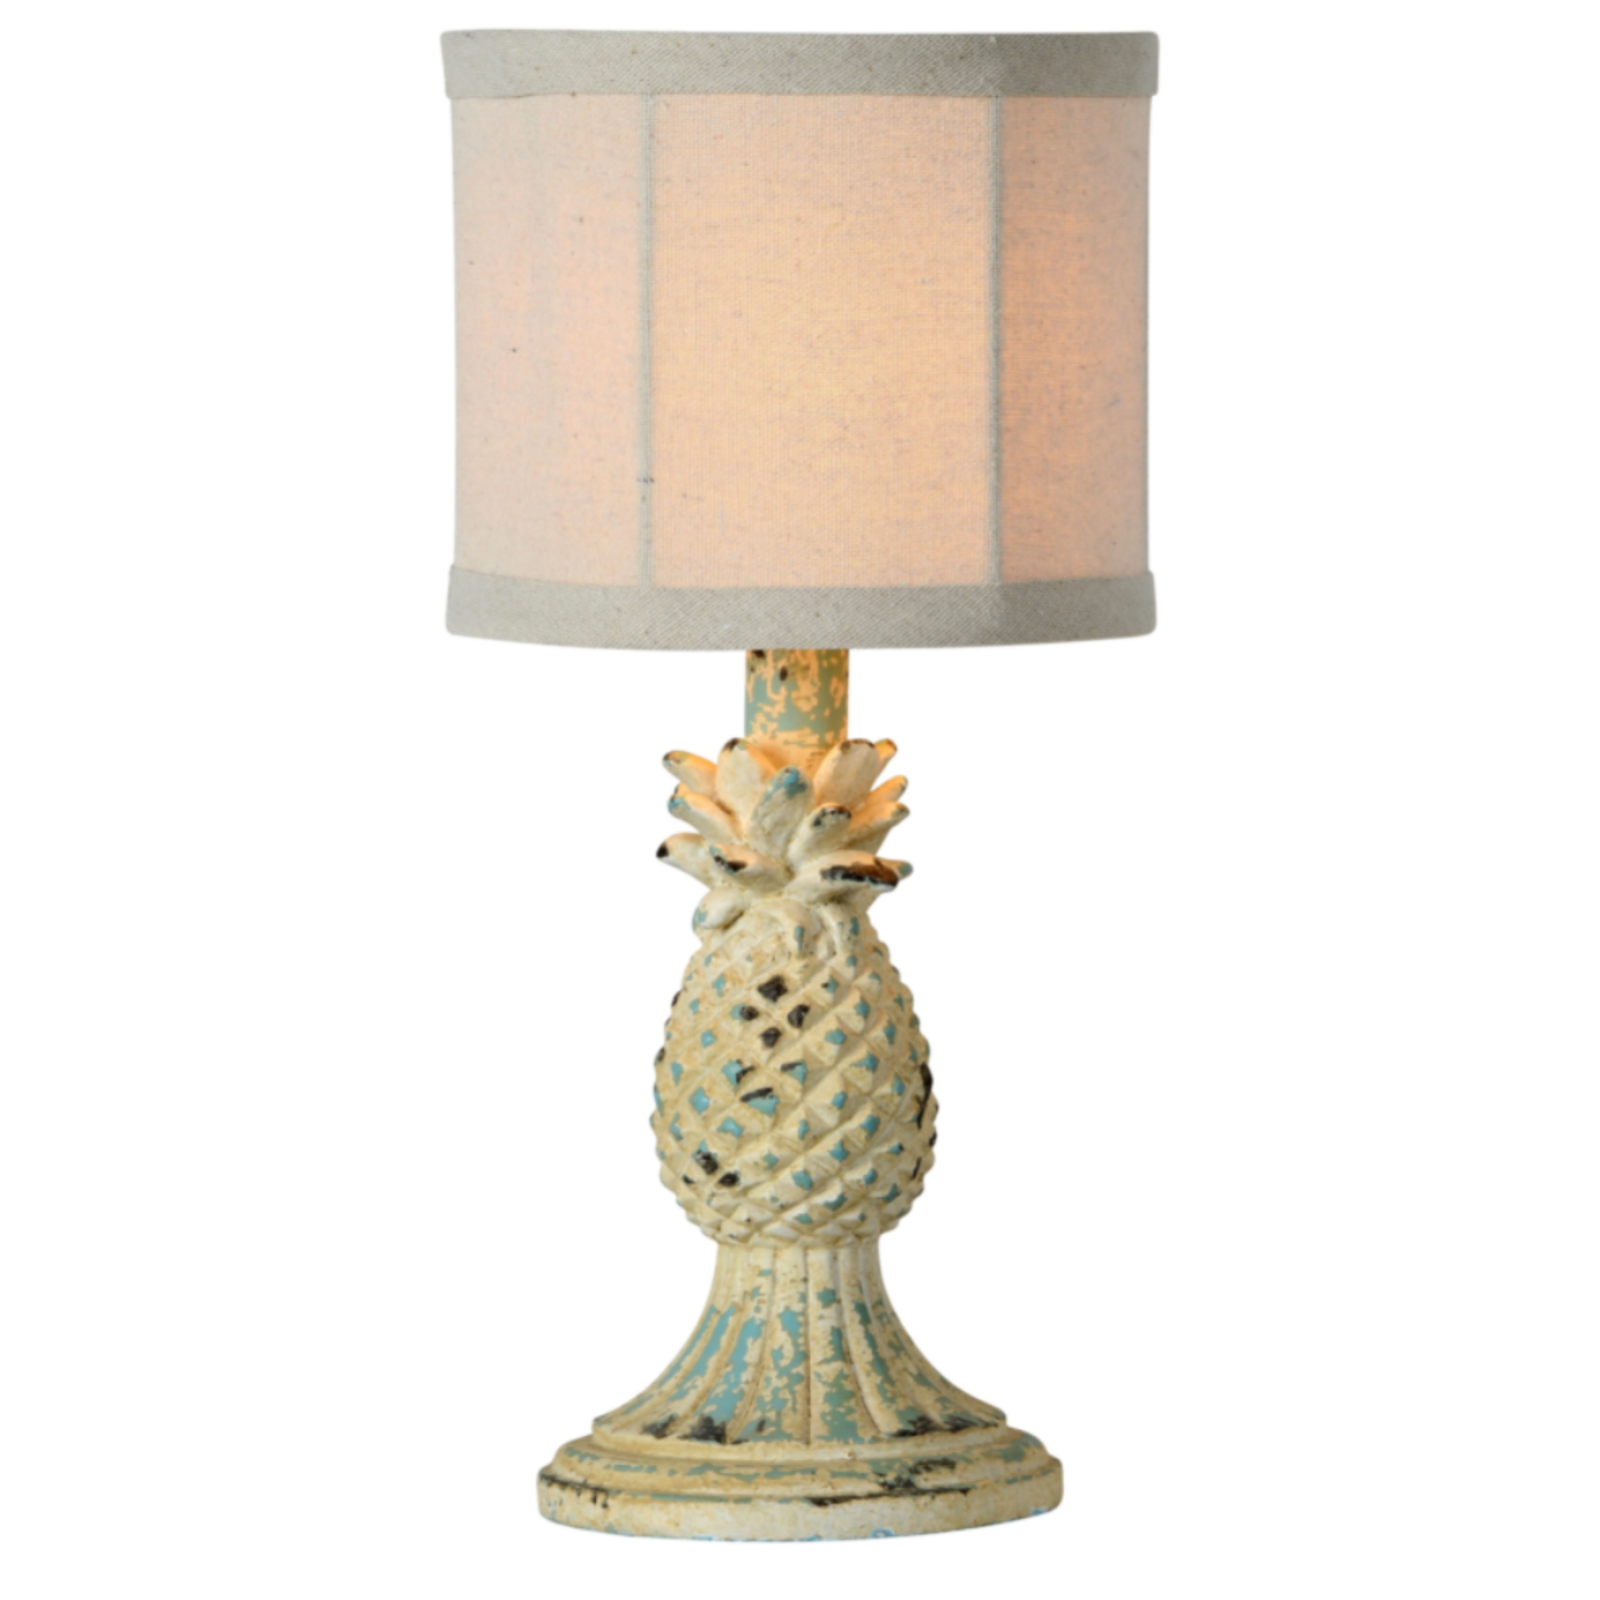 Forty West Ripley Table Lamp  70907 loading=